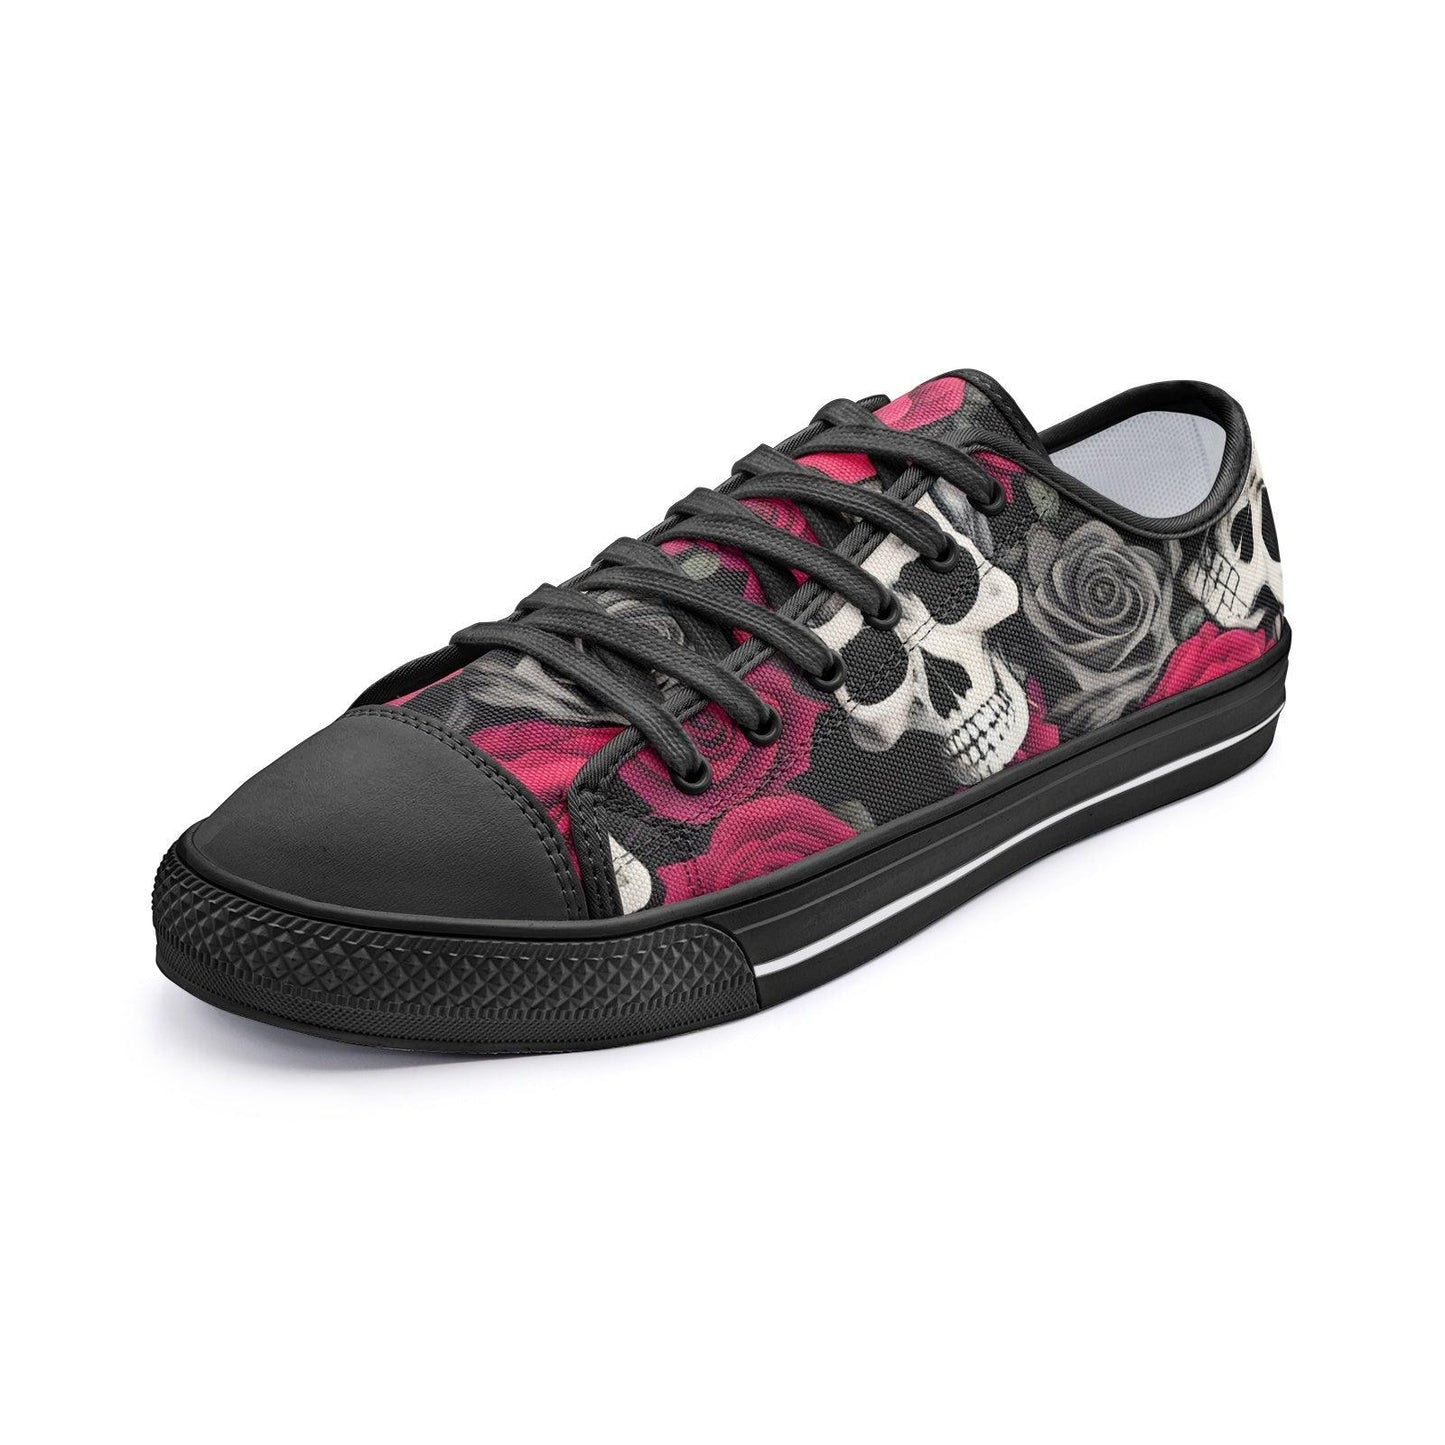 Skulls And Roses - Freaky Shoes®